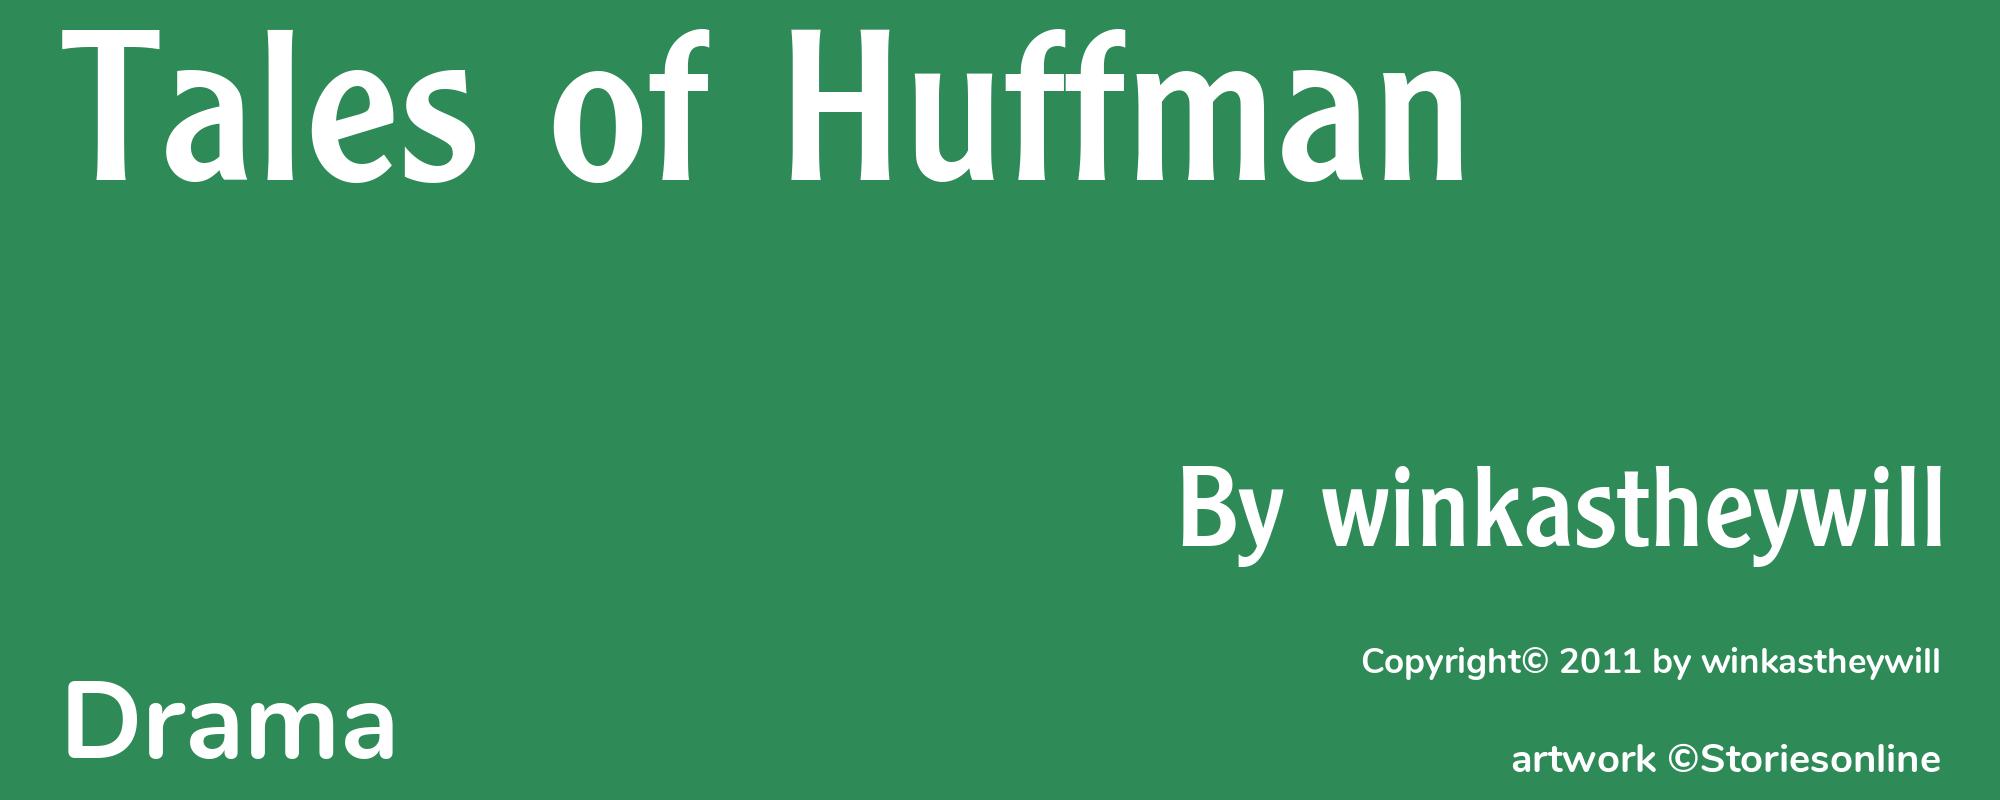 Tales of Huffman - Cover